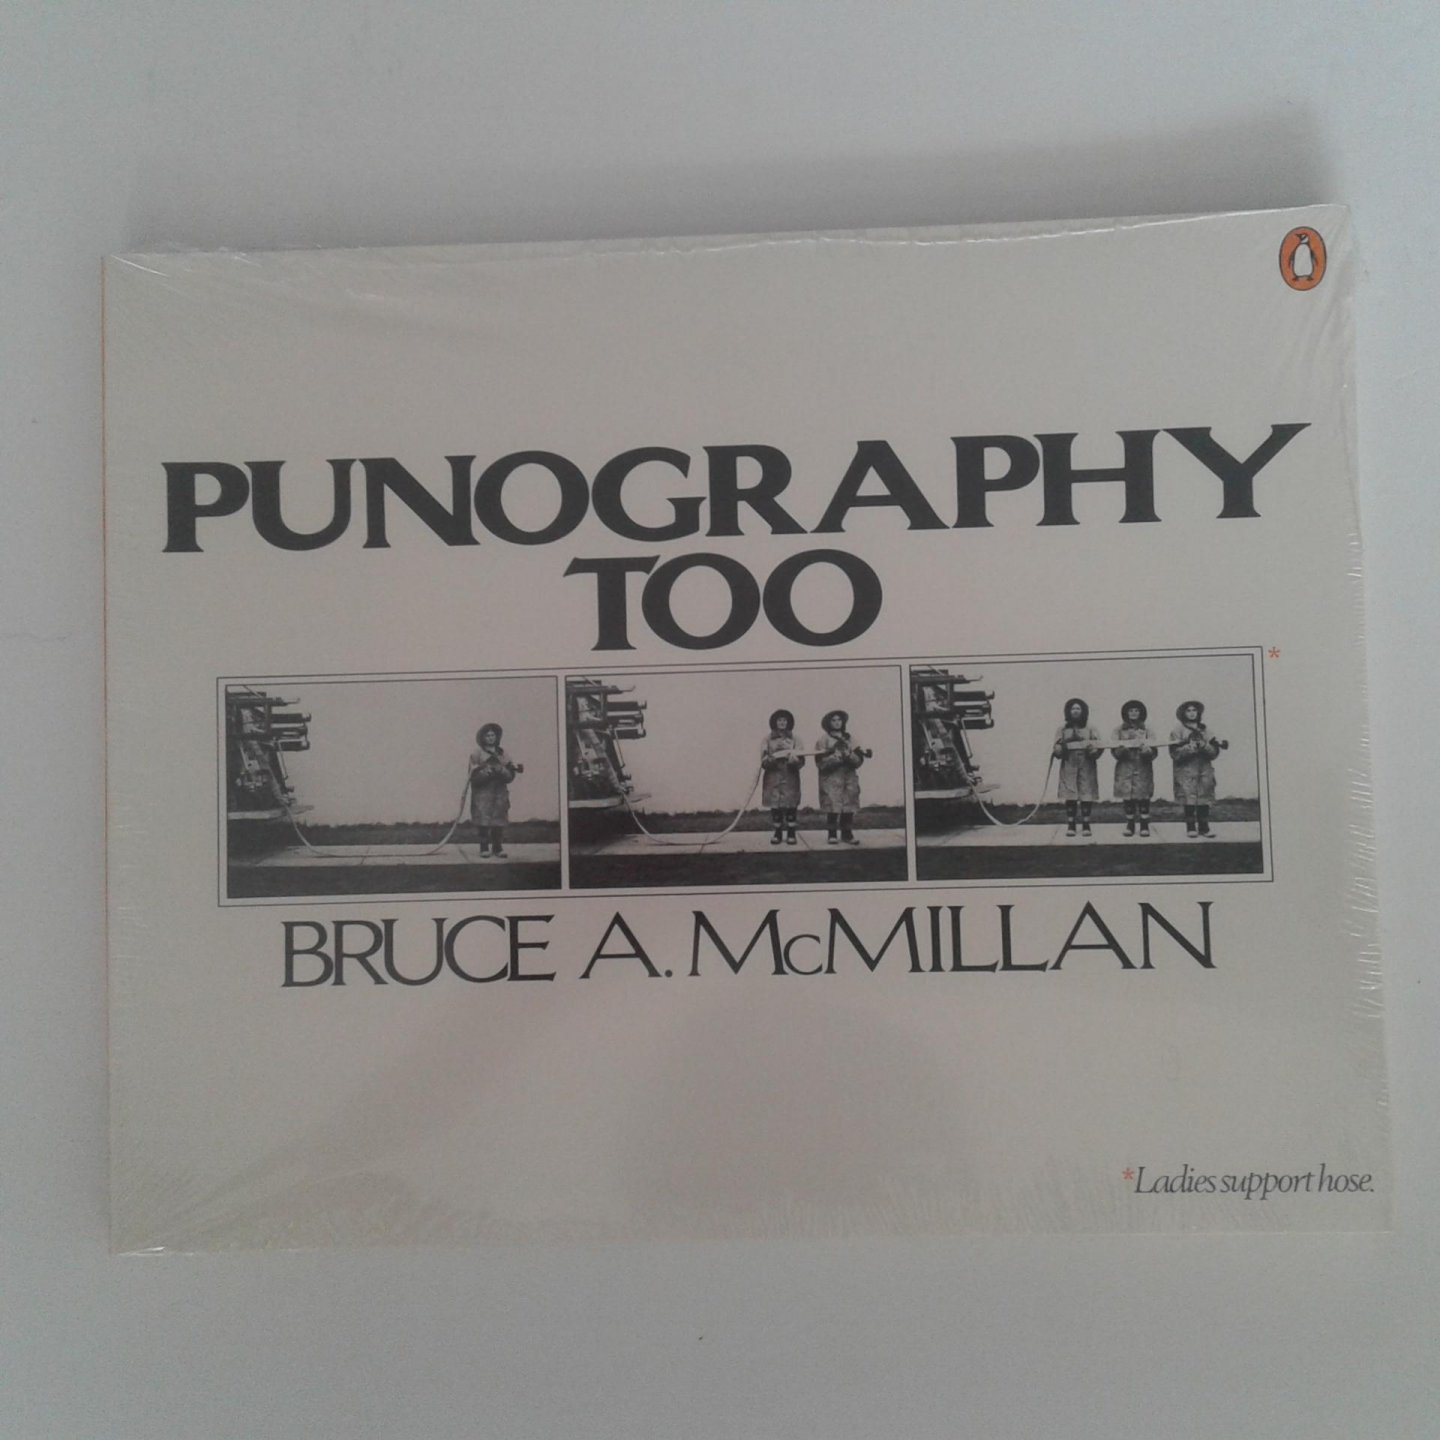 McMillan, Bruce A. - Punography Too